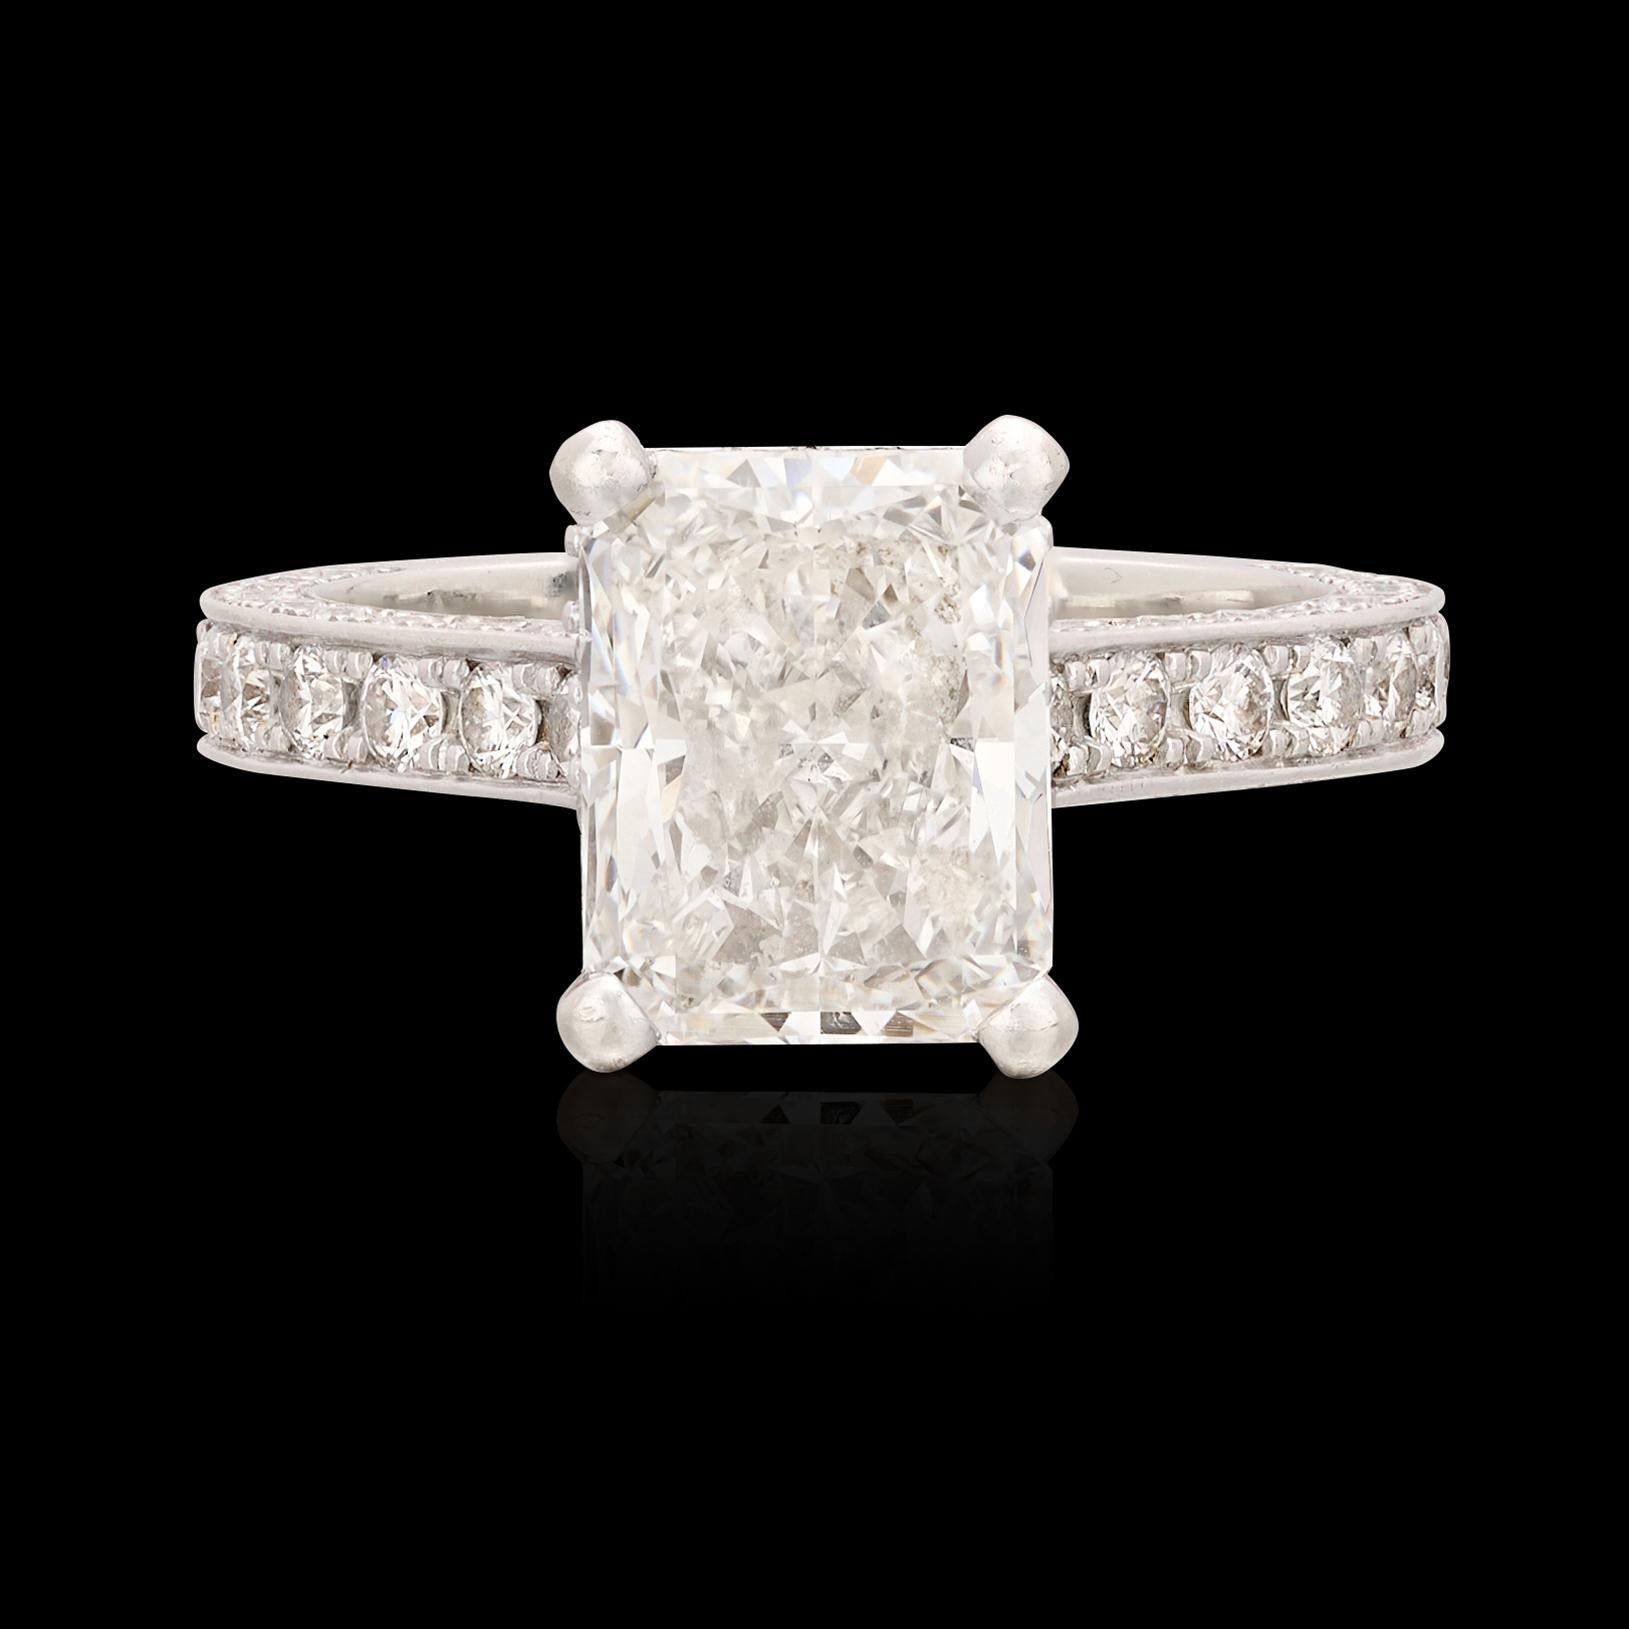 An absolutely gorgeous diamond set in a unique mounting designed for maximum sparkle and brilliance! This 18 karat white gold beauty showcases a stunning 3.01 carat Radiant Cut diamond expertly set with four prongs floating above a halo of fine